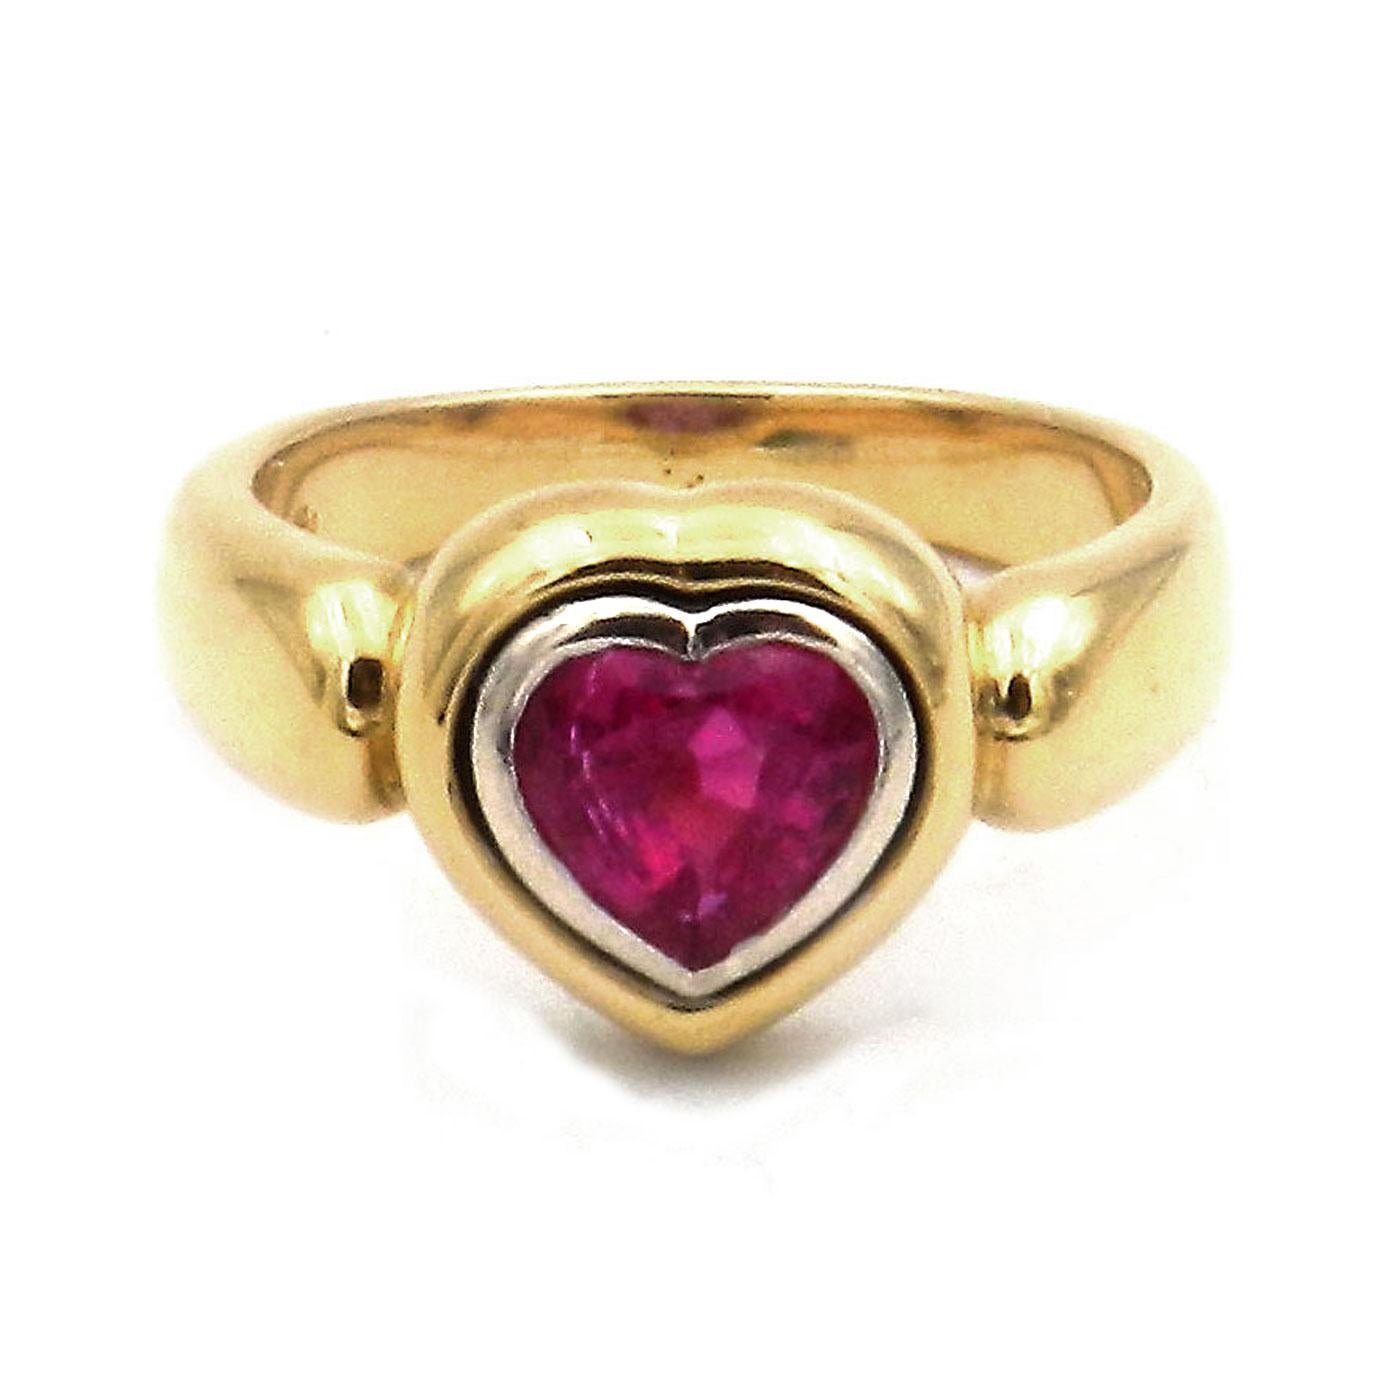 Certified Heart Shaped 1.3 ct No Heat Ruby 18 K Yellow Gold Ring

Attractive gold ring with a heart-shaped natural ruby, edged in platinum, the solid ring band made of 18 K yellow gold. Meticulously handcrafted and signed with maker's mark.

